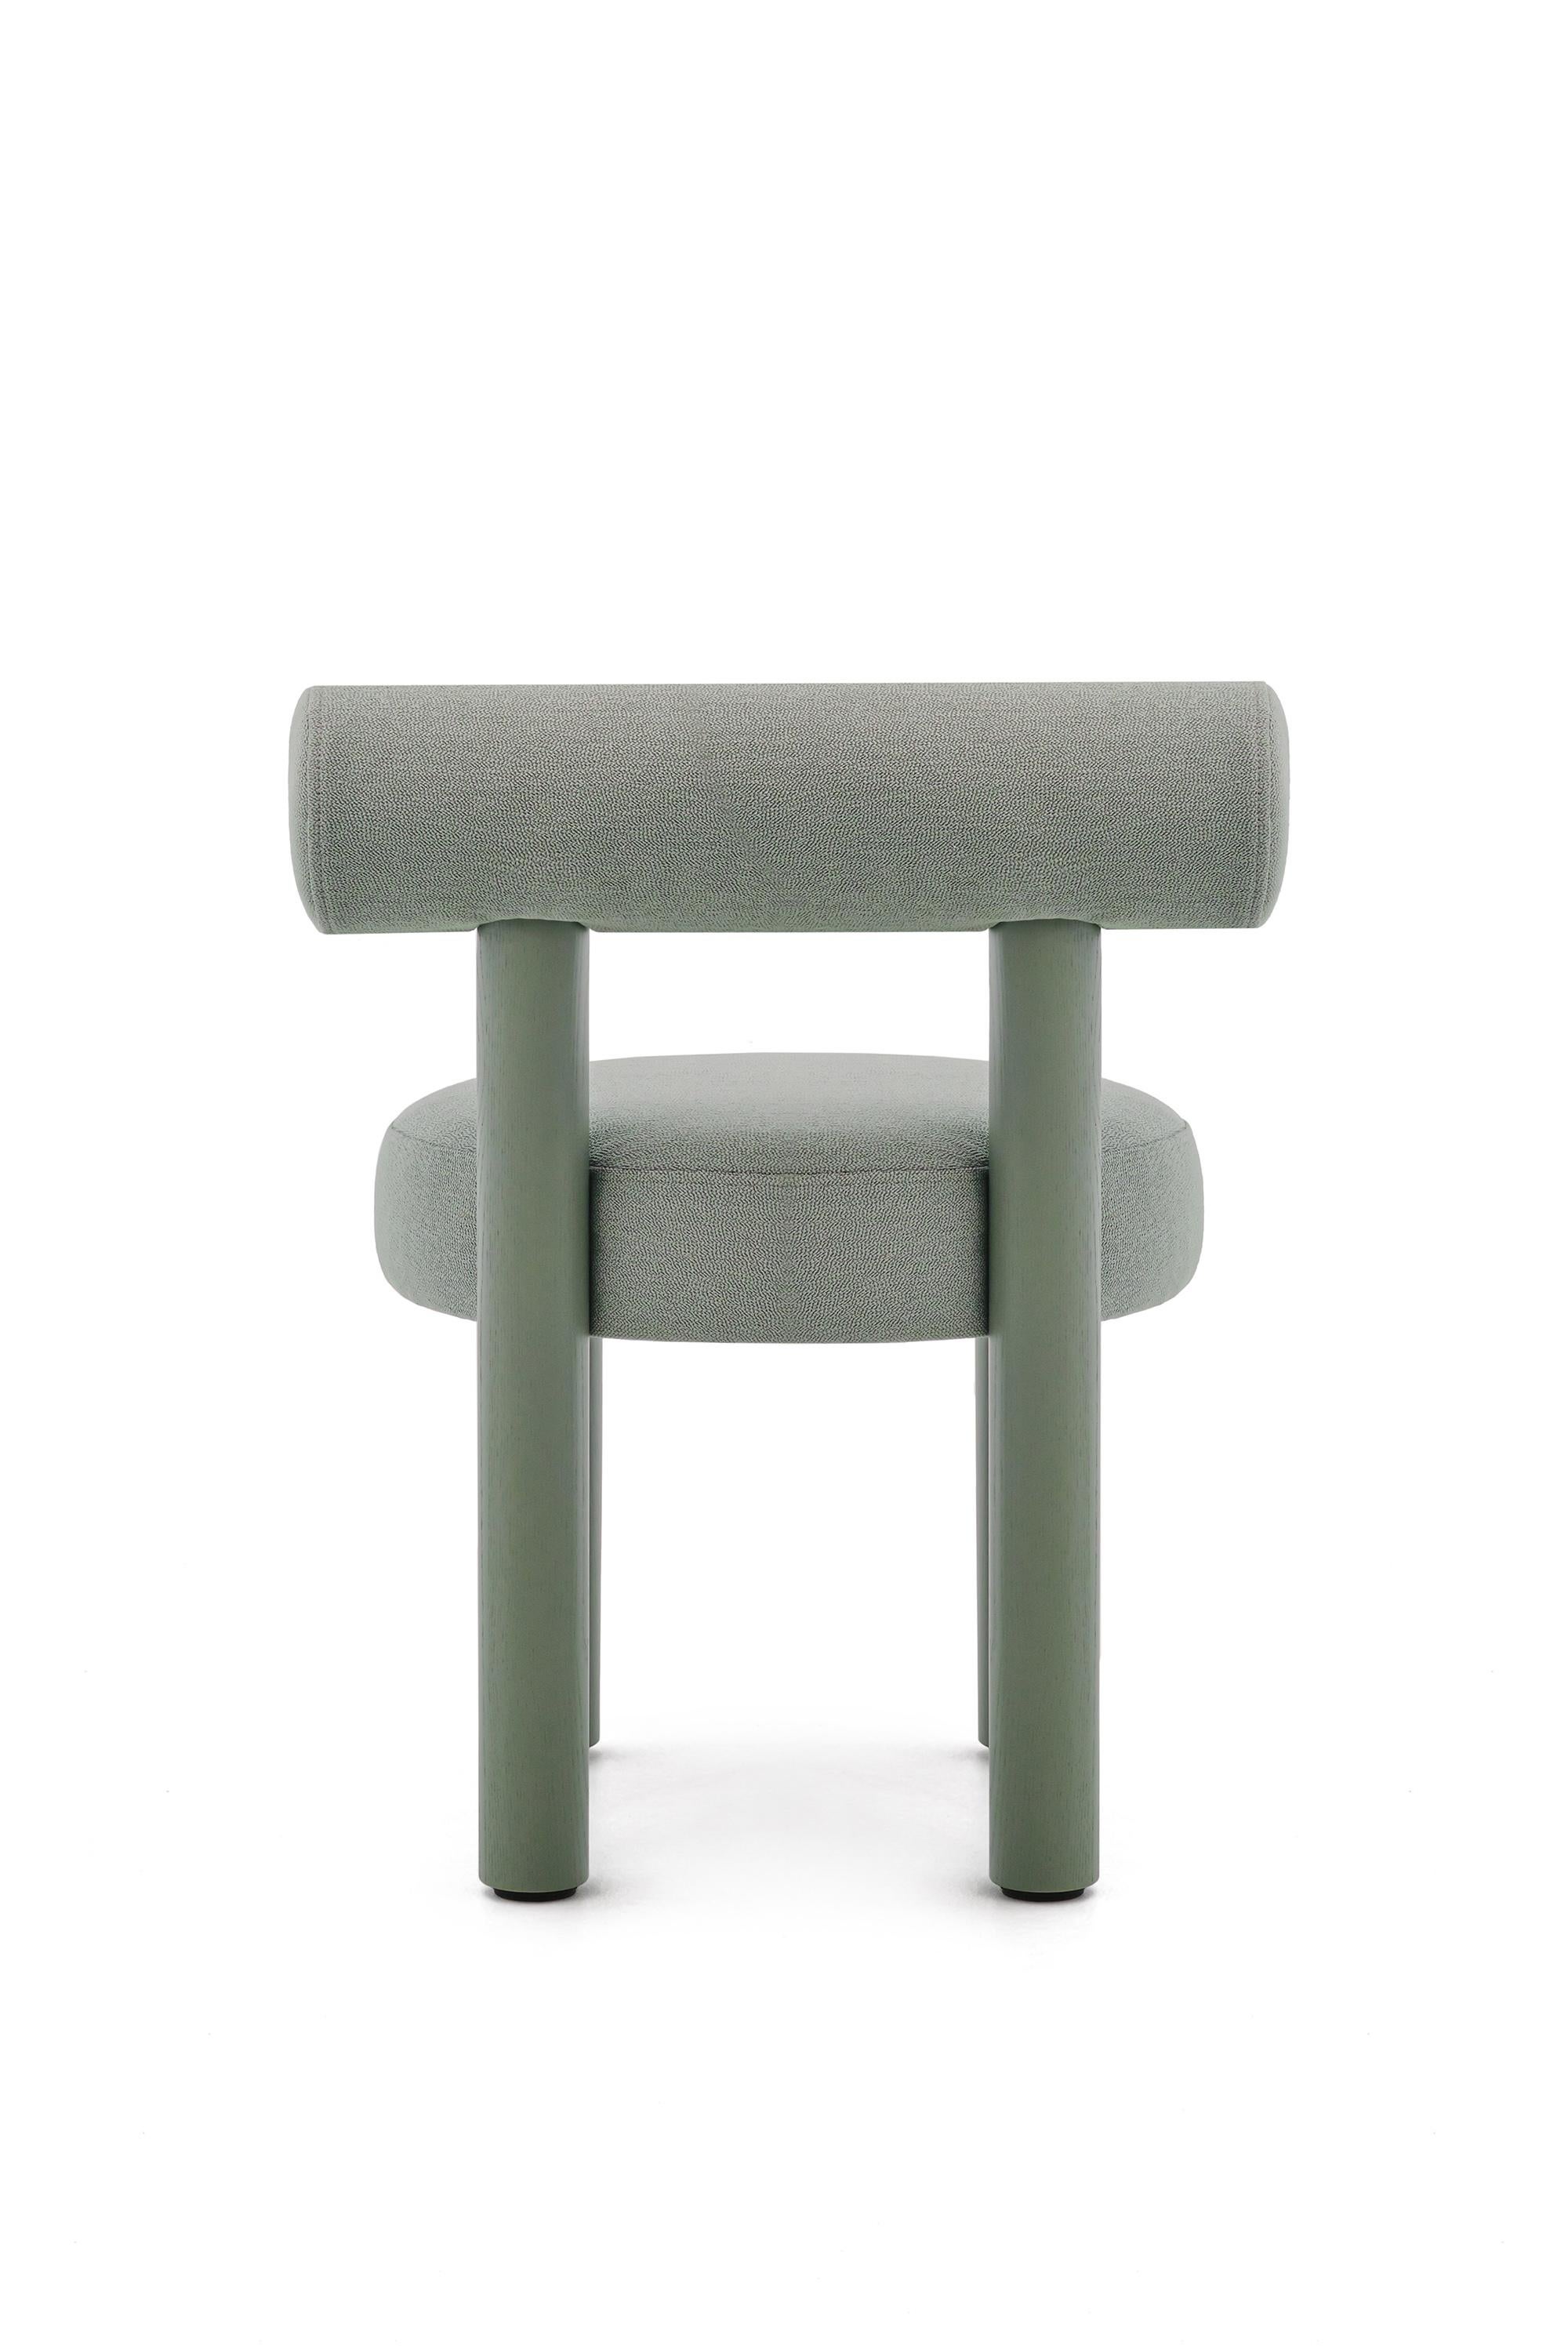 Modern Dining Chair Gropius CS2 in Wool Fabric with Wooden Legs by Noom 8